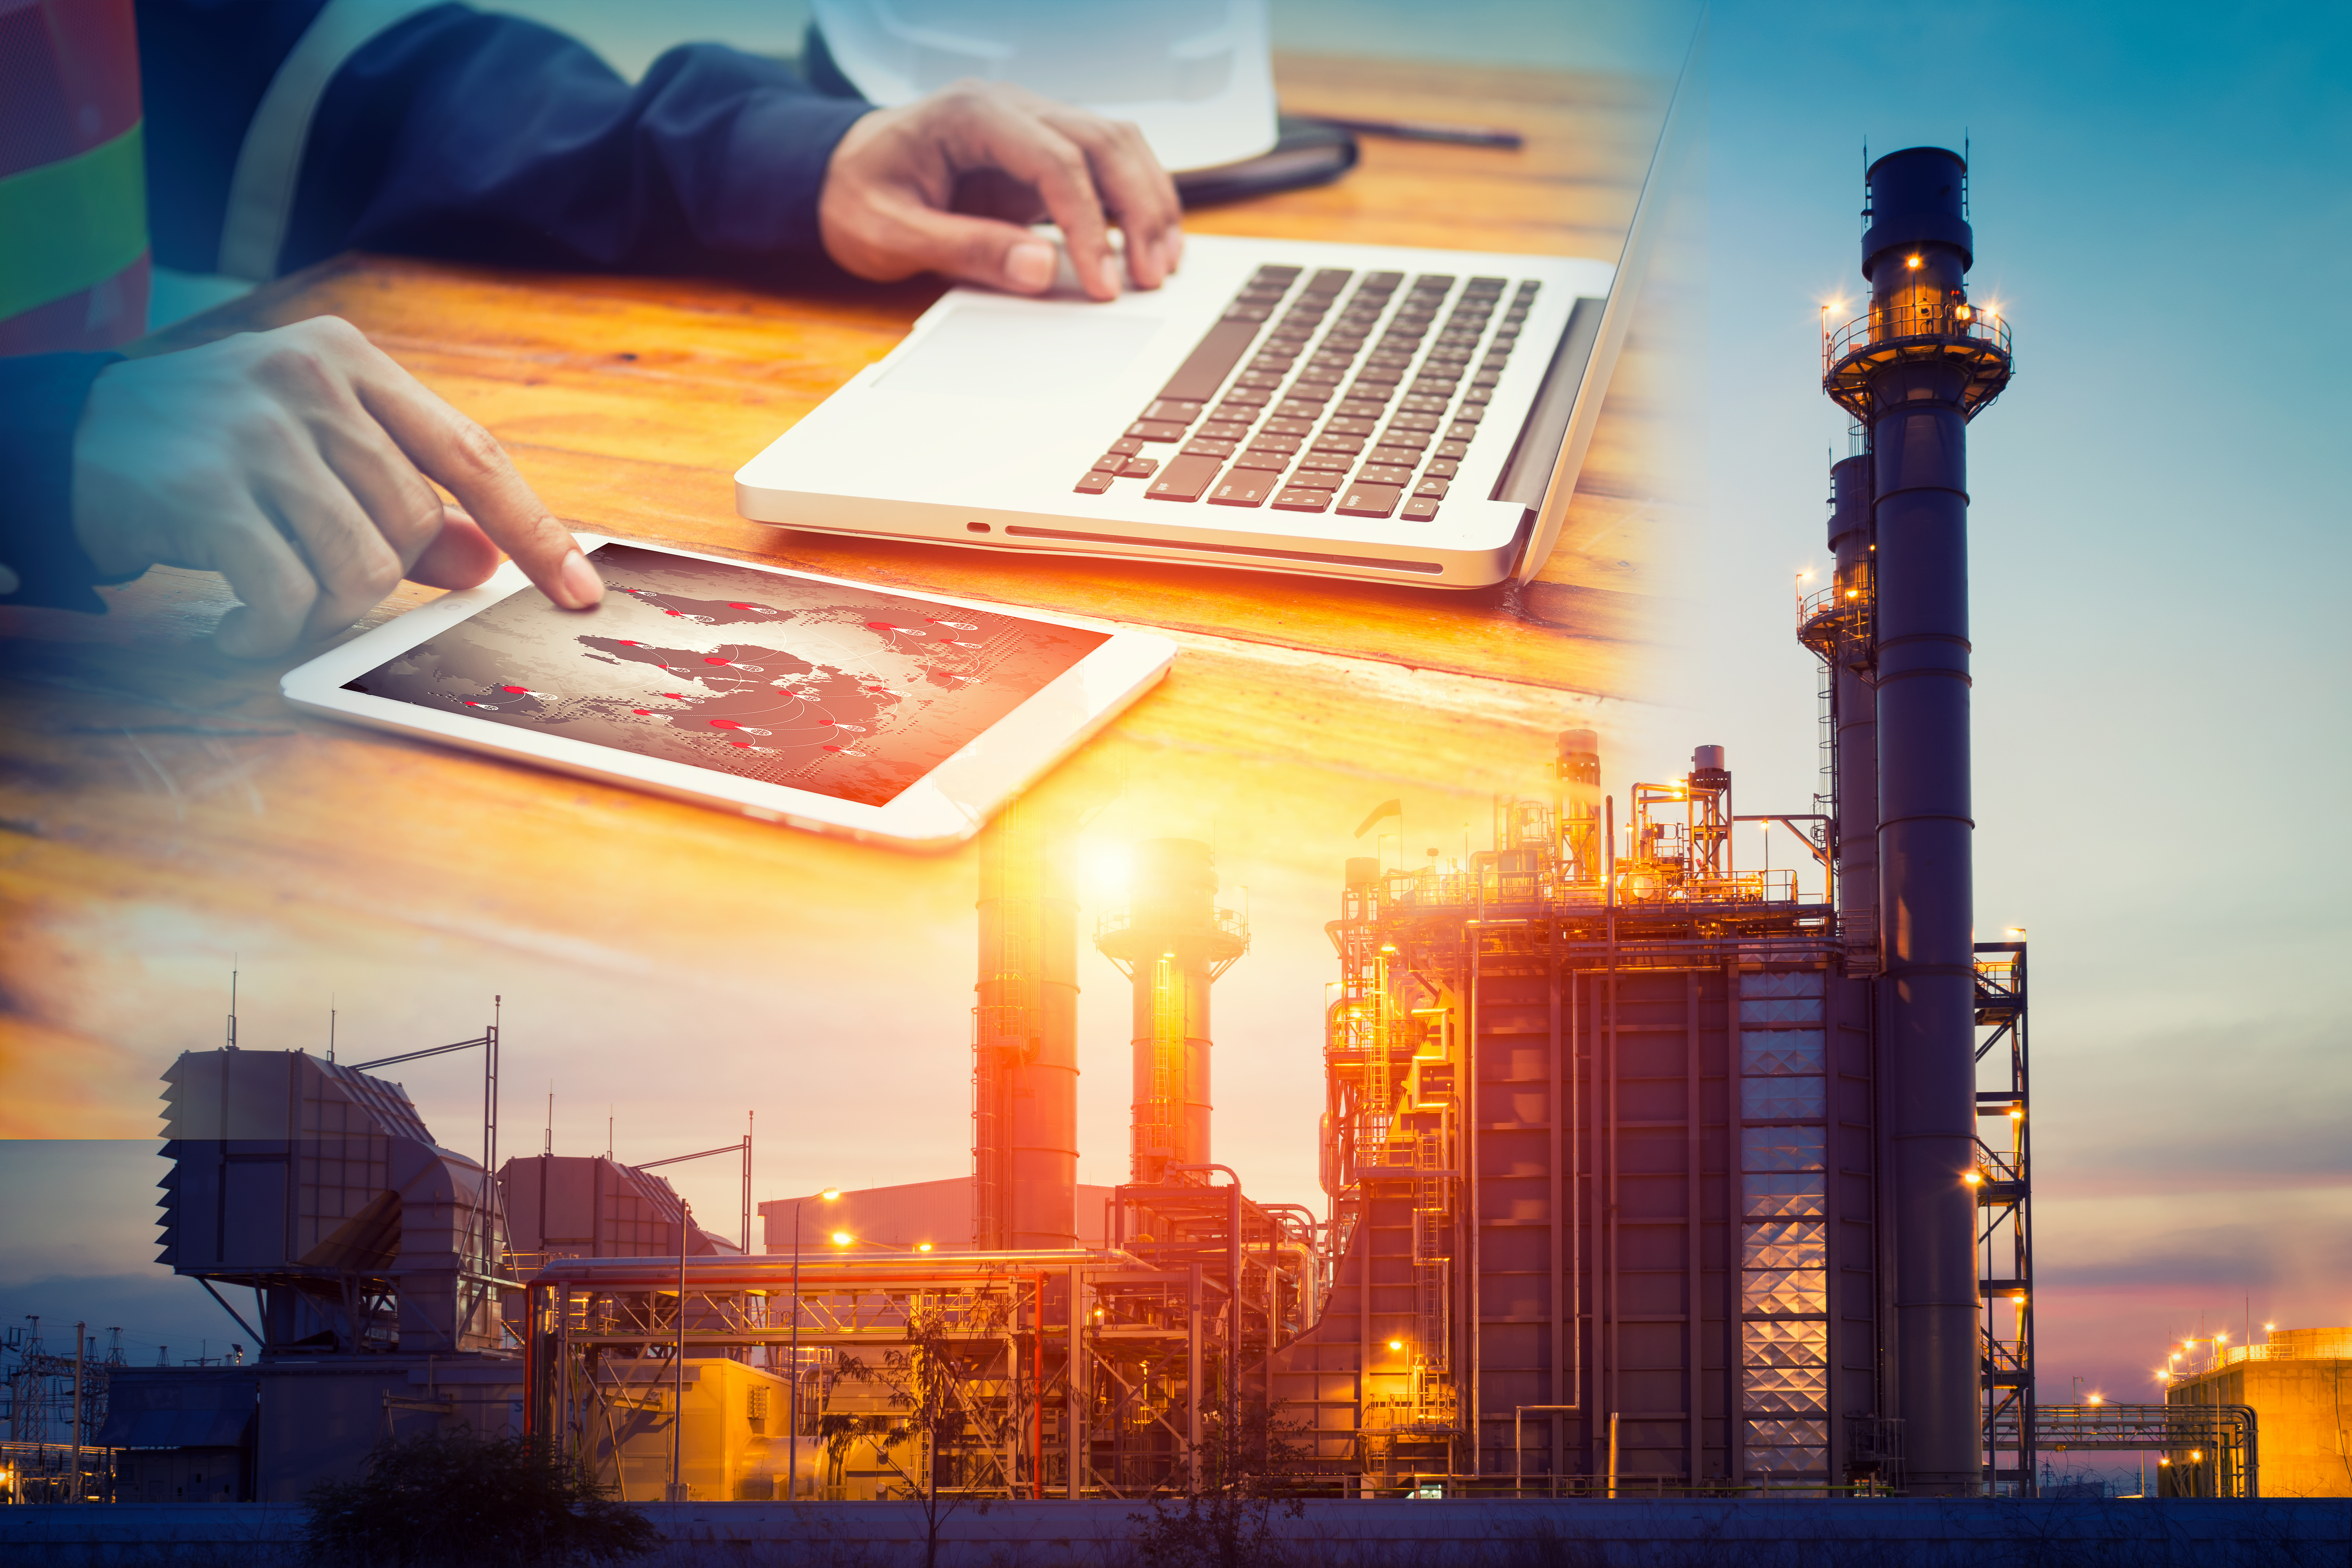 Digital twins for power plant processes